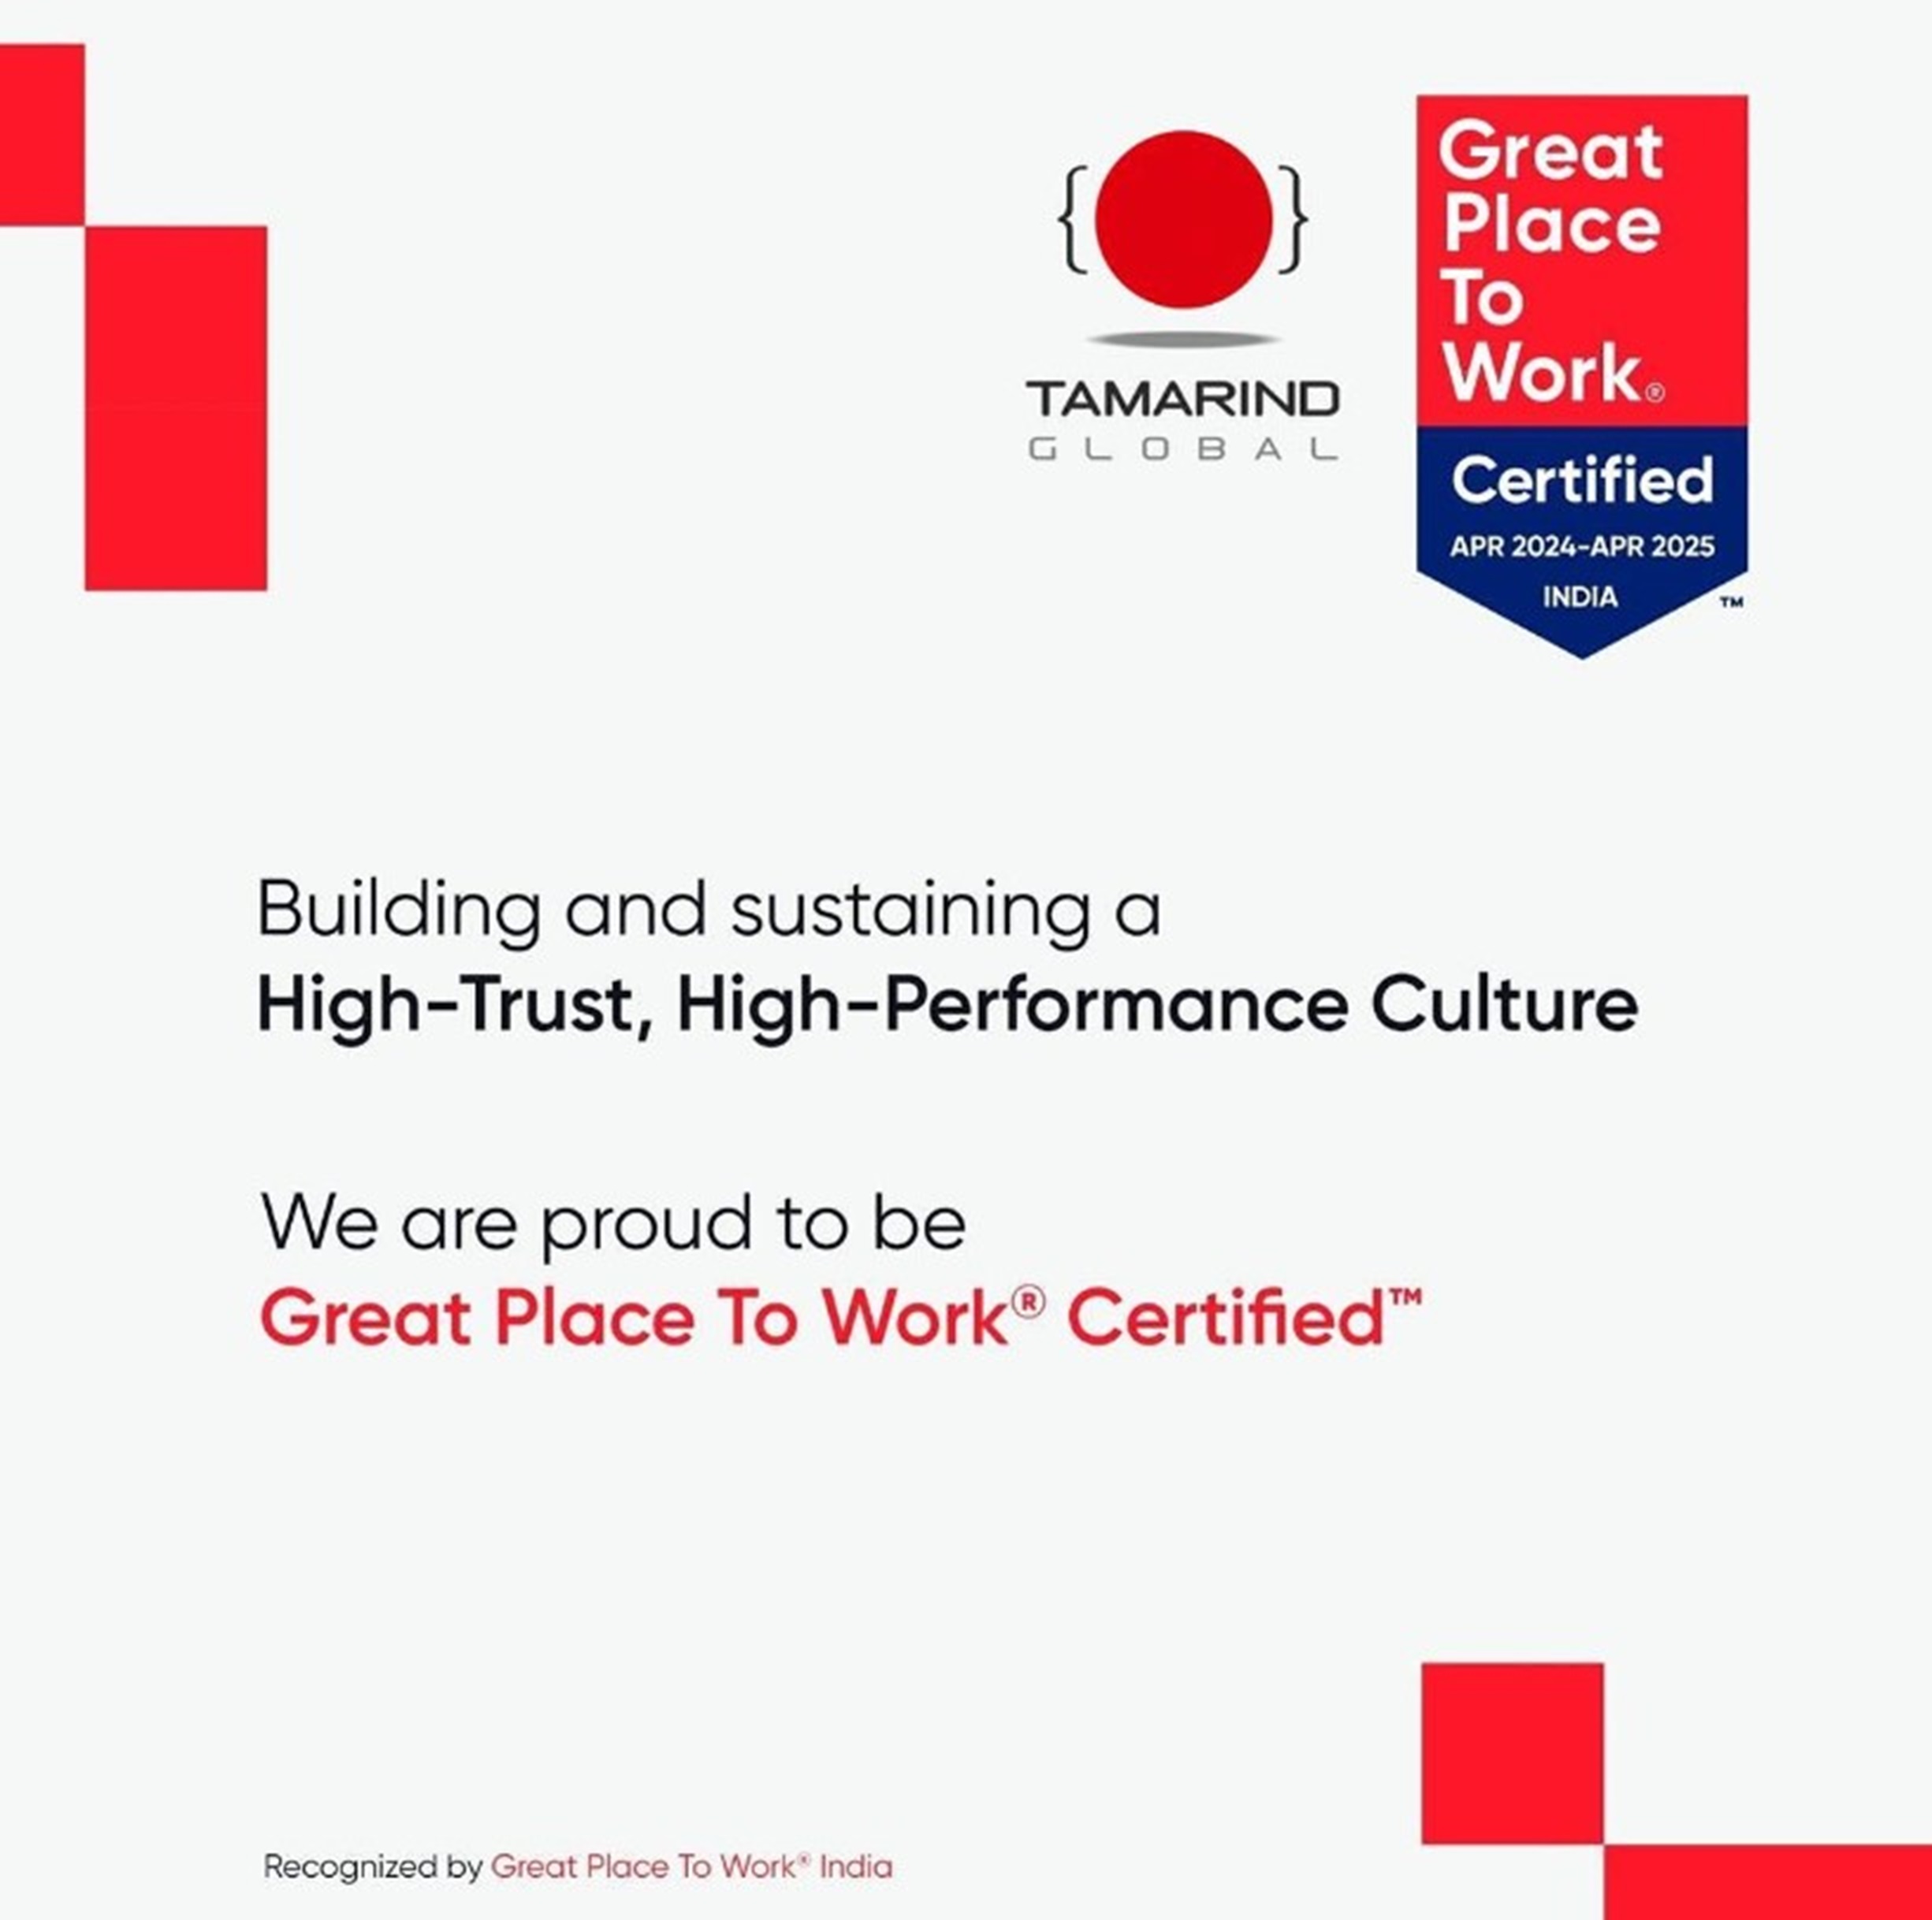 Tamarind Global Achieves Great Place to Work® certification